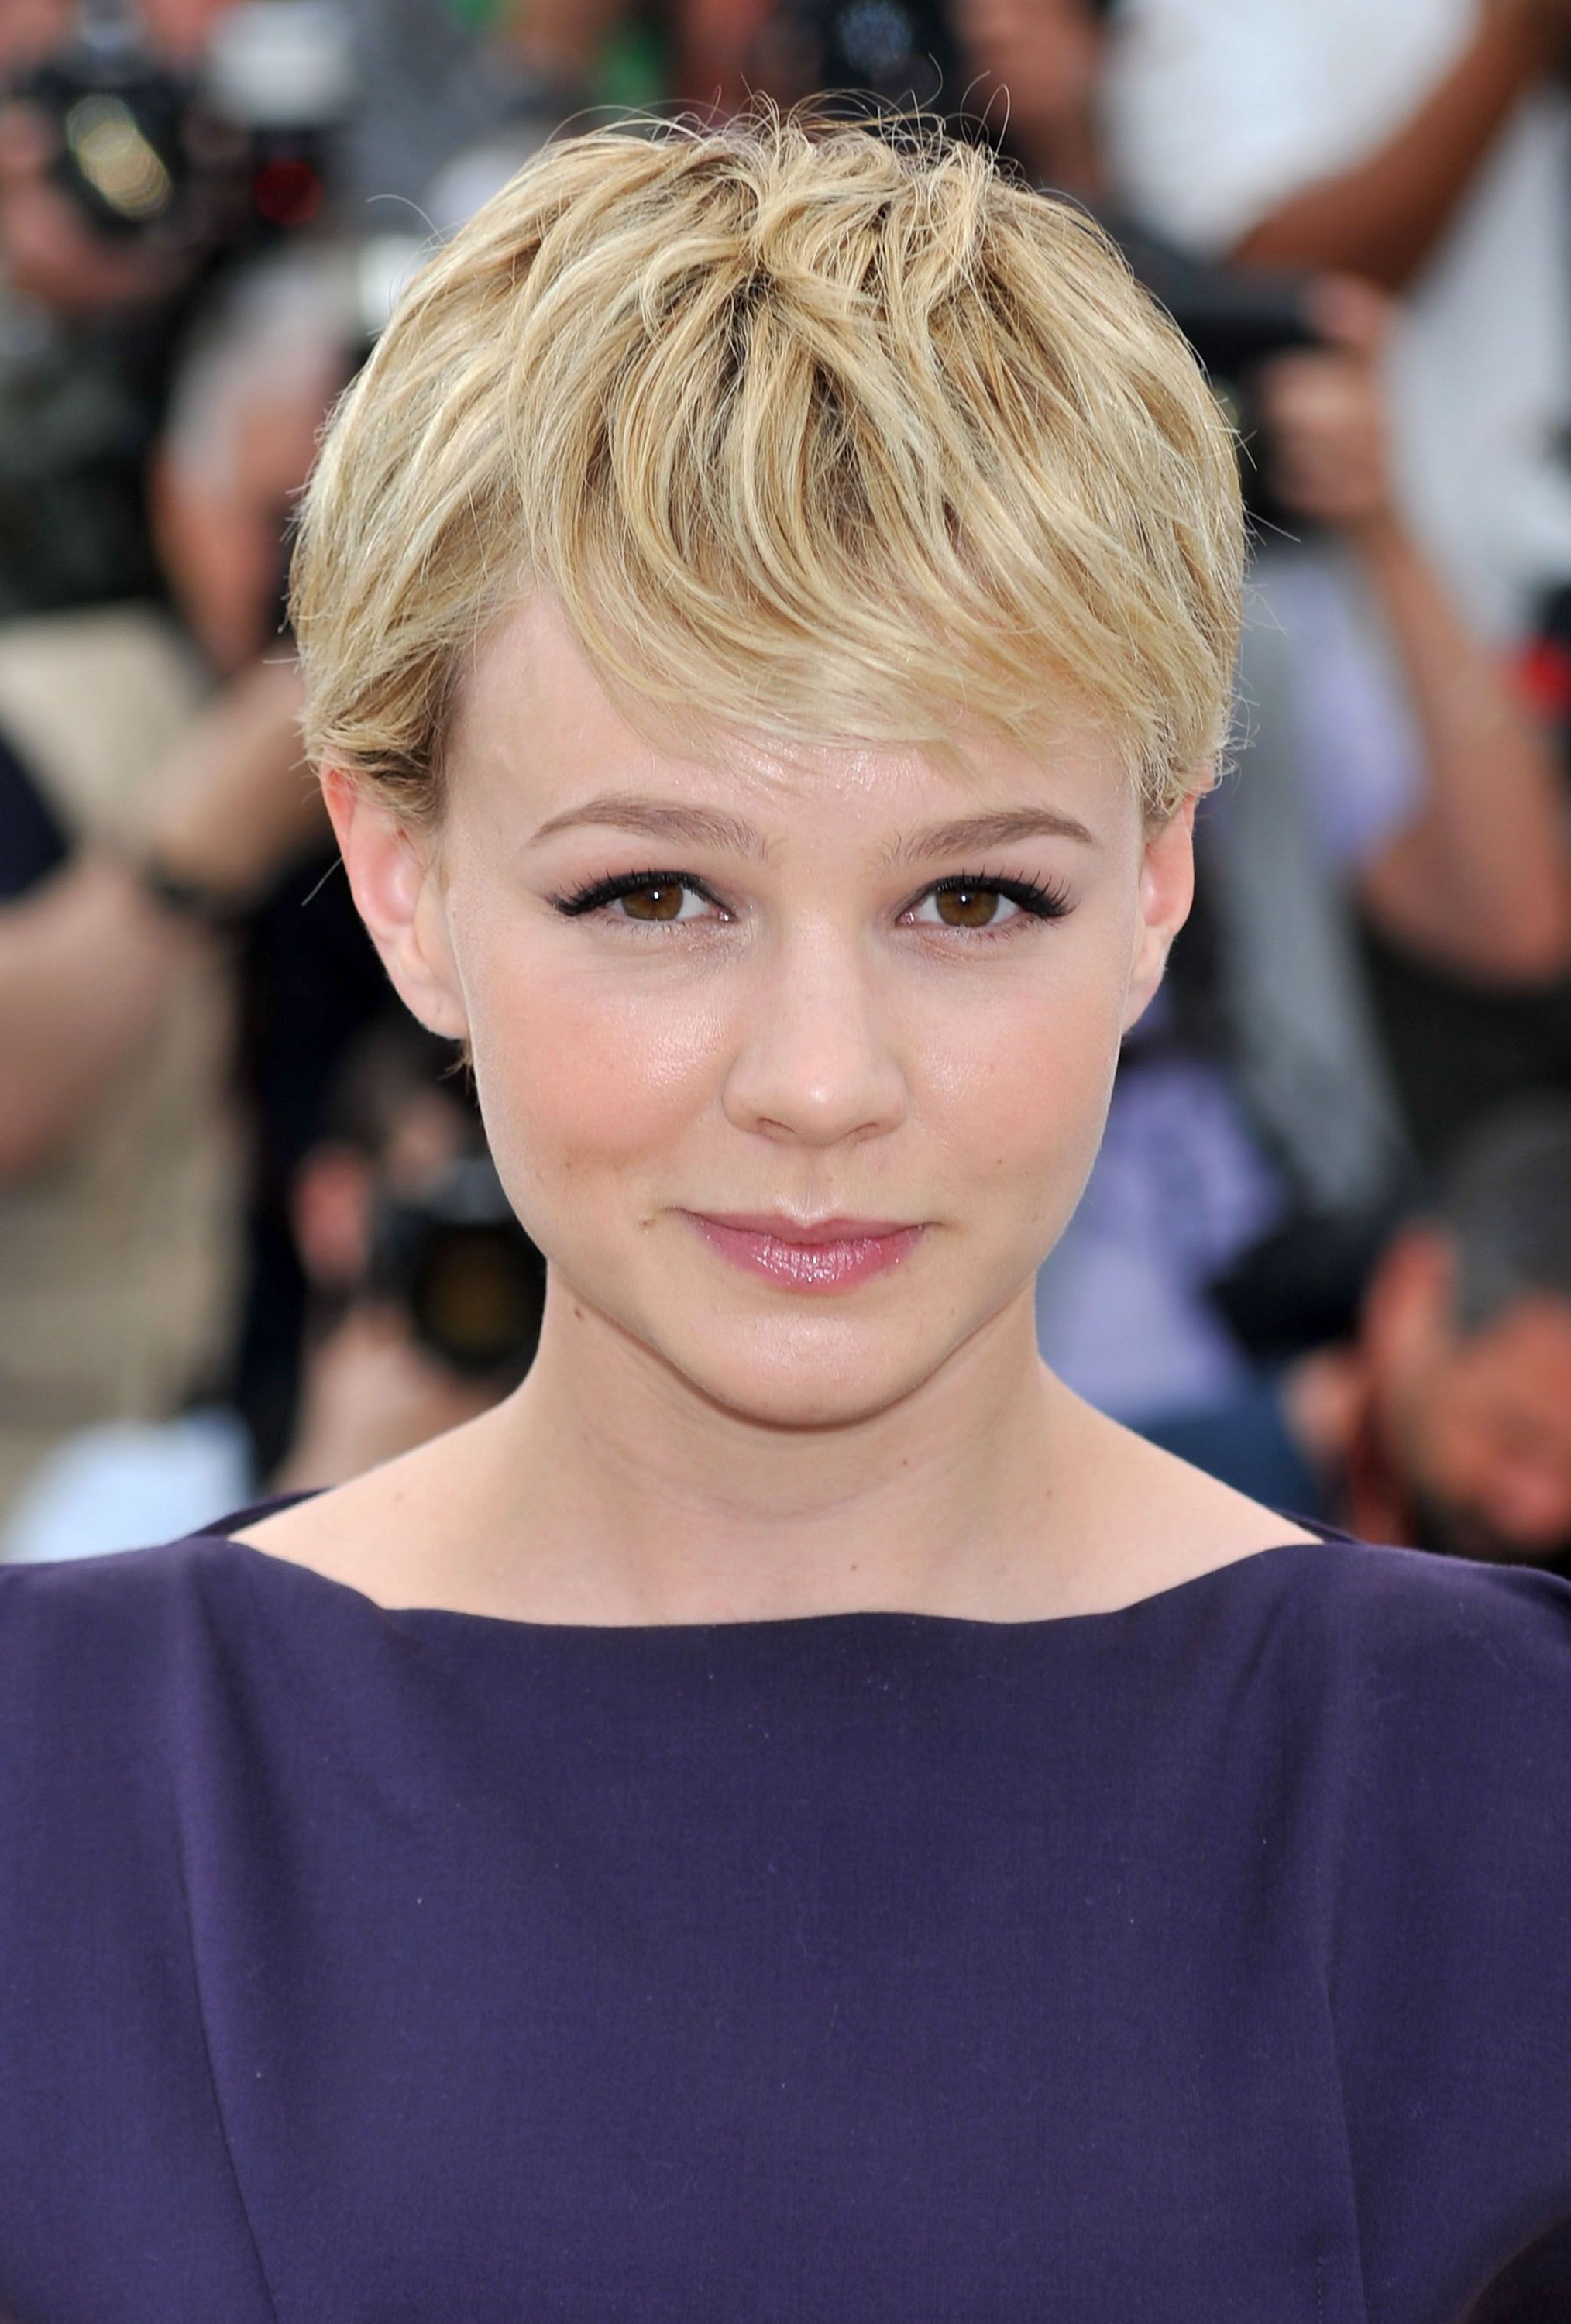 65 Best Short Hairstyles, Haircuts, And Short Hair Ideas For 2018 For Short Haircuts For Celebrities (Photo 14 of 25)